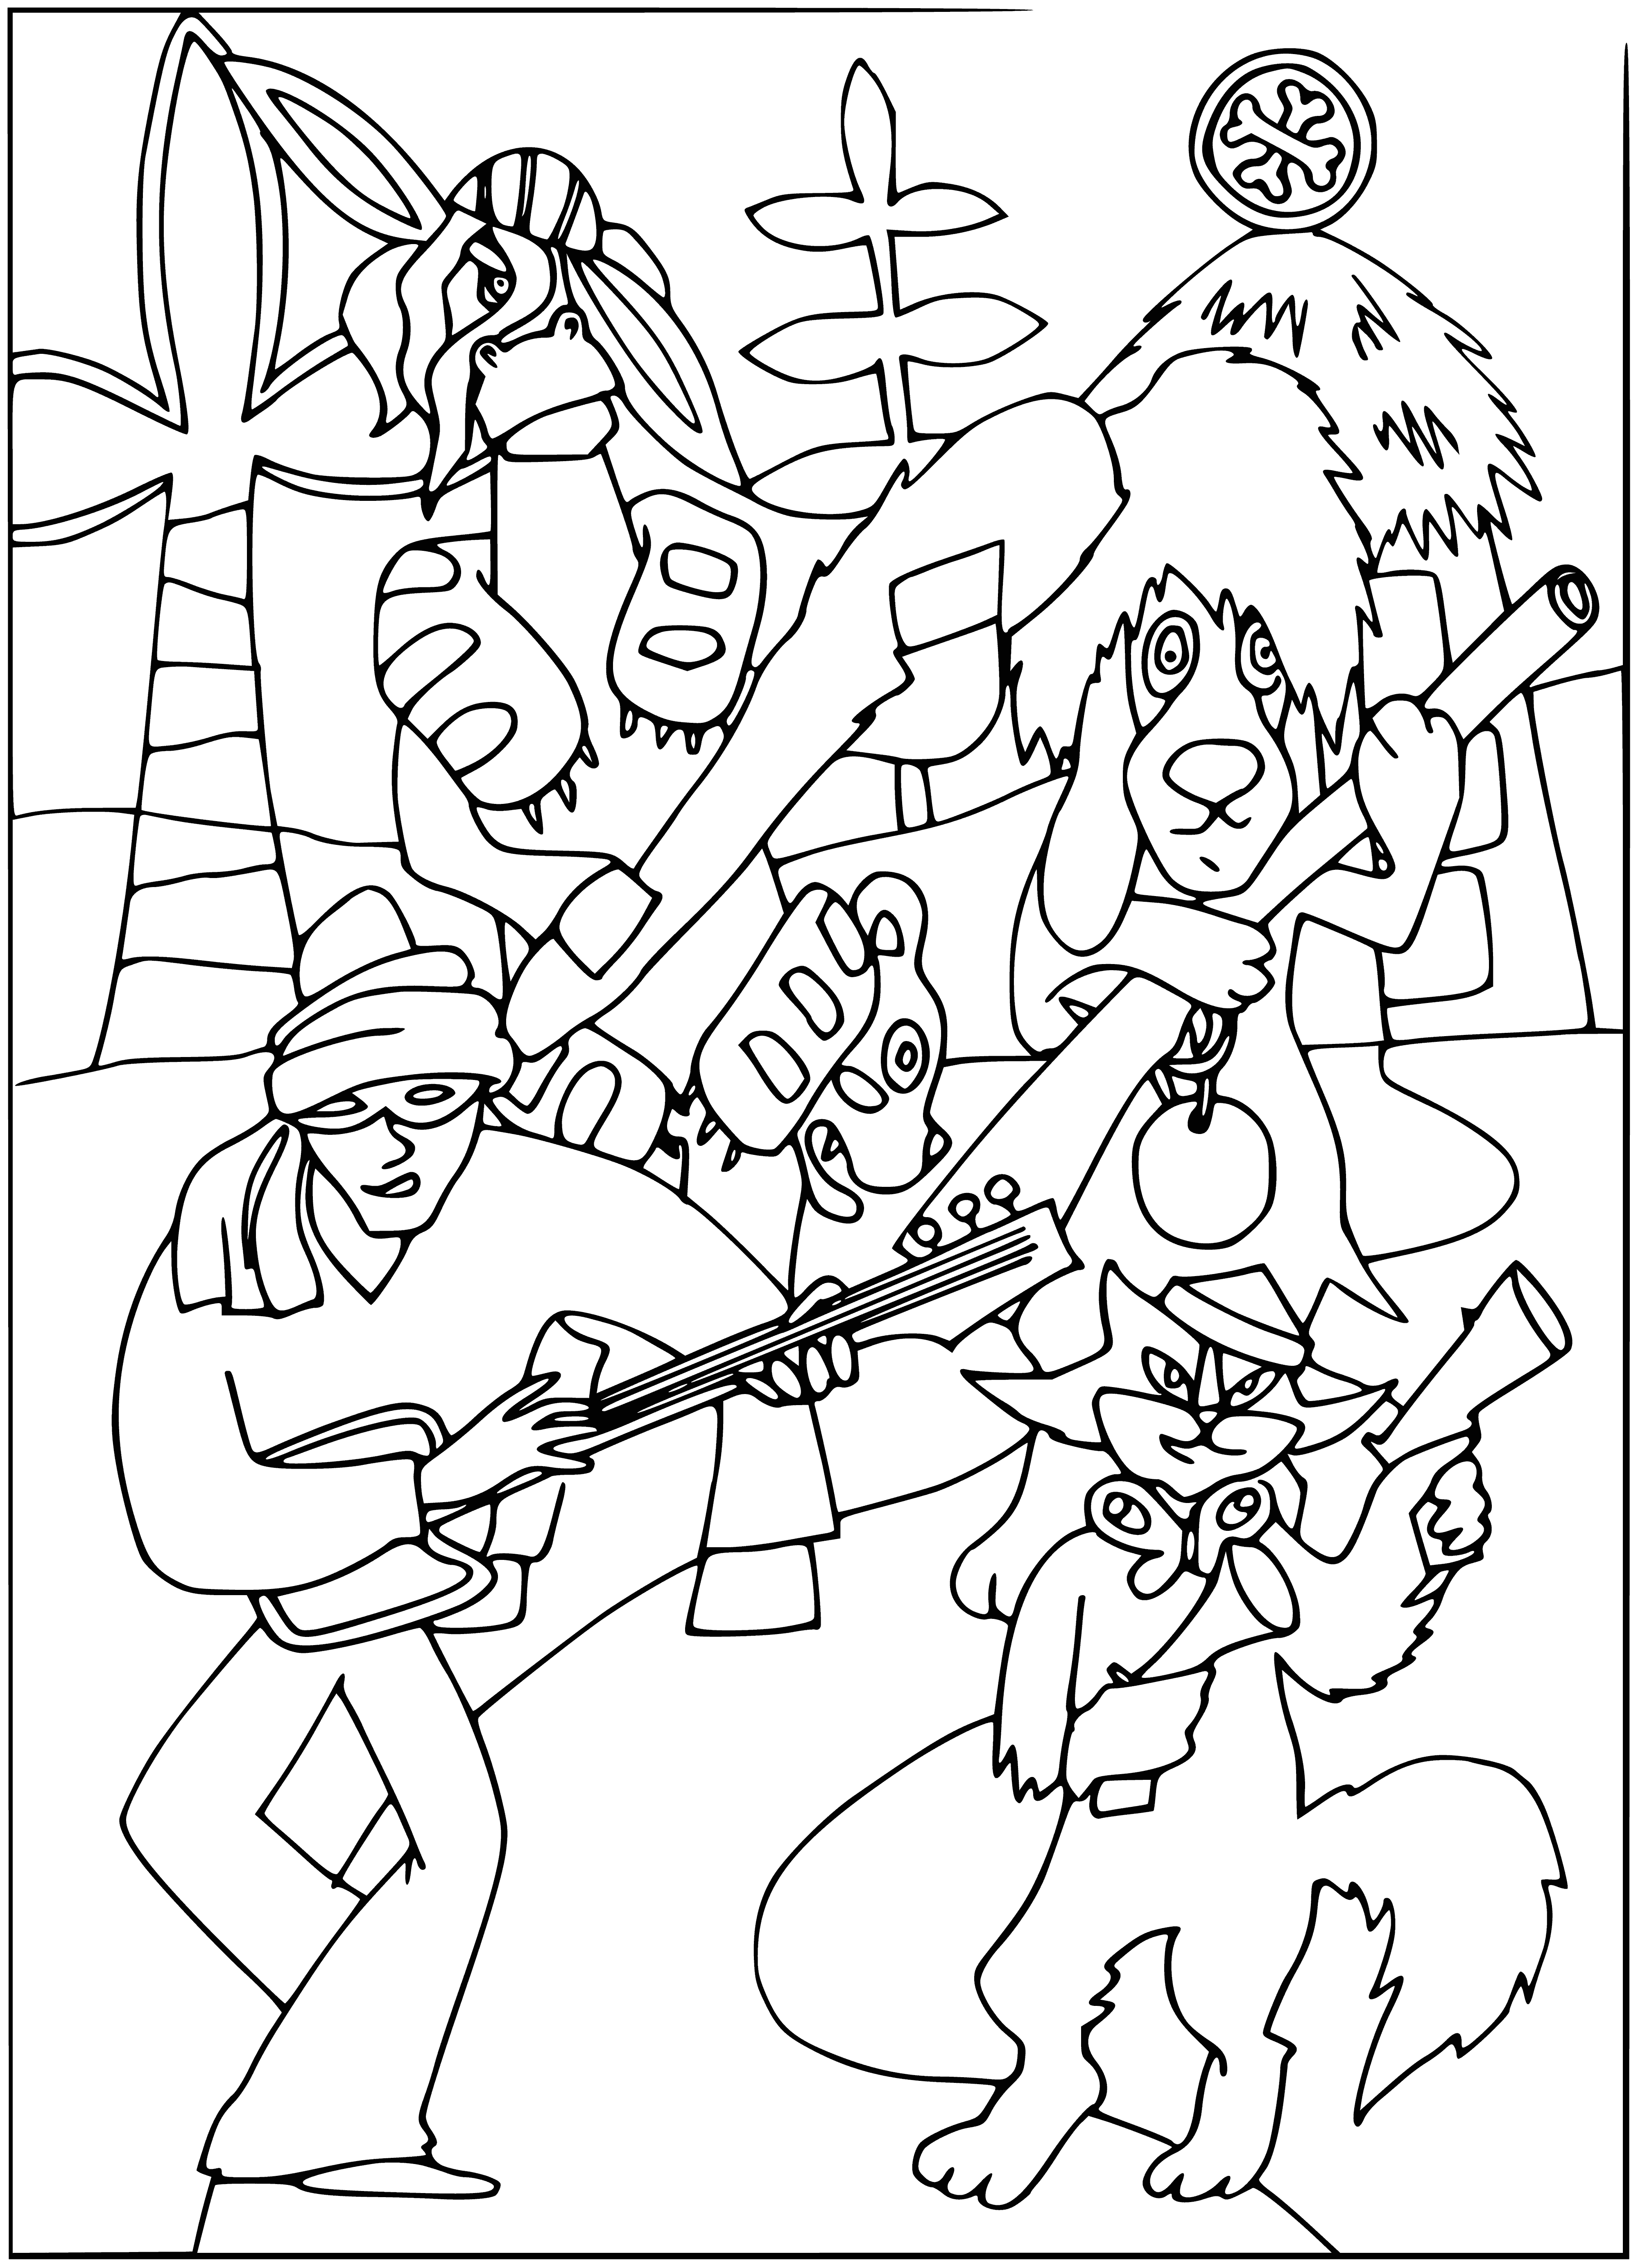 coloring page: Four animals form a band: donkey plays mandolin, dog plays fiddle, cat plays cymbal & rooster plays guitar, all w/ bandanas tied around their necks.